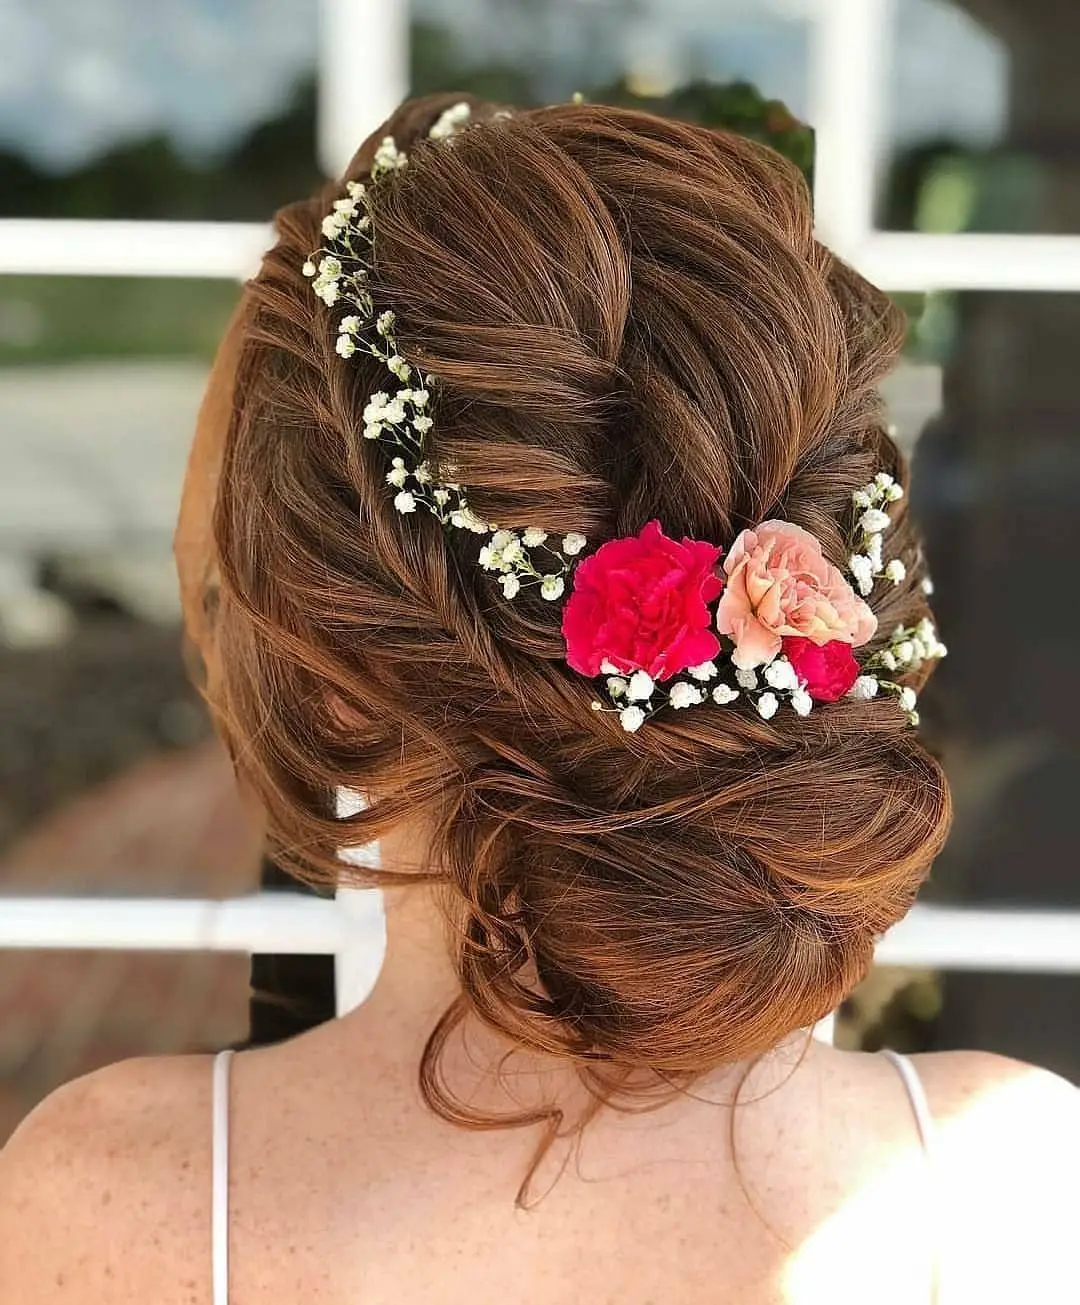 Flower style hairstyle